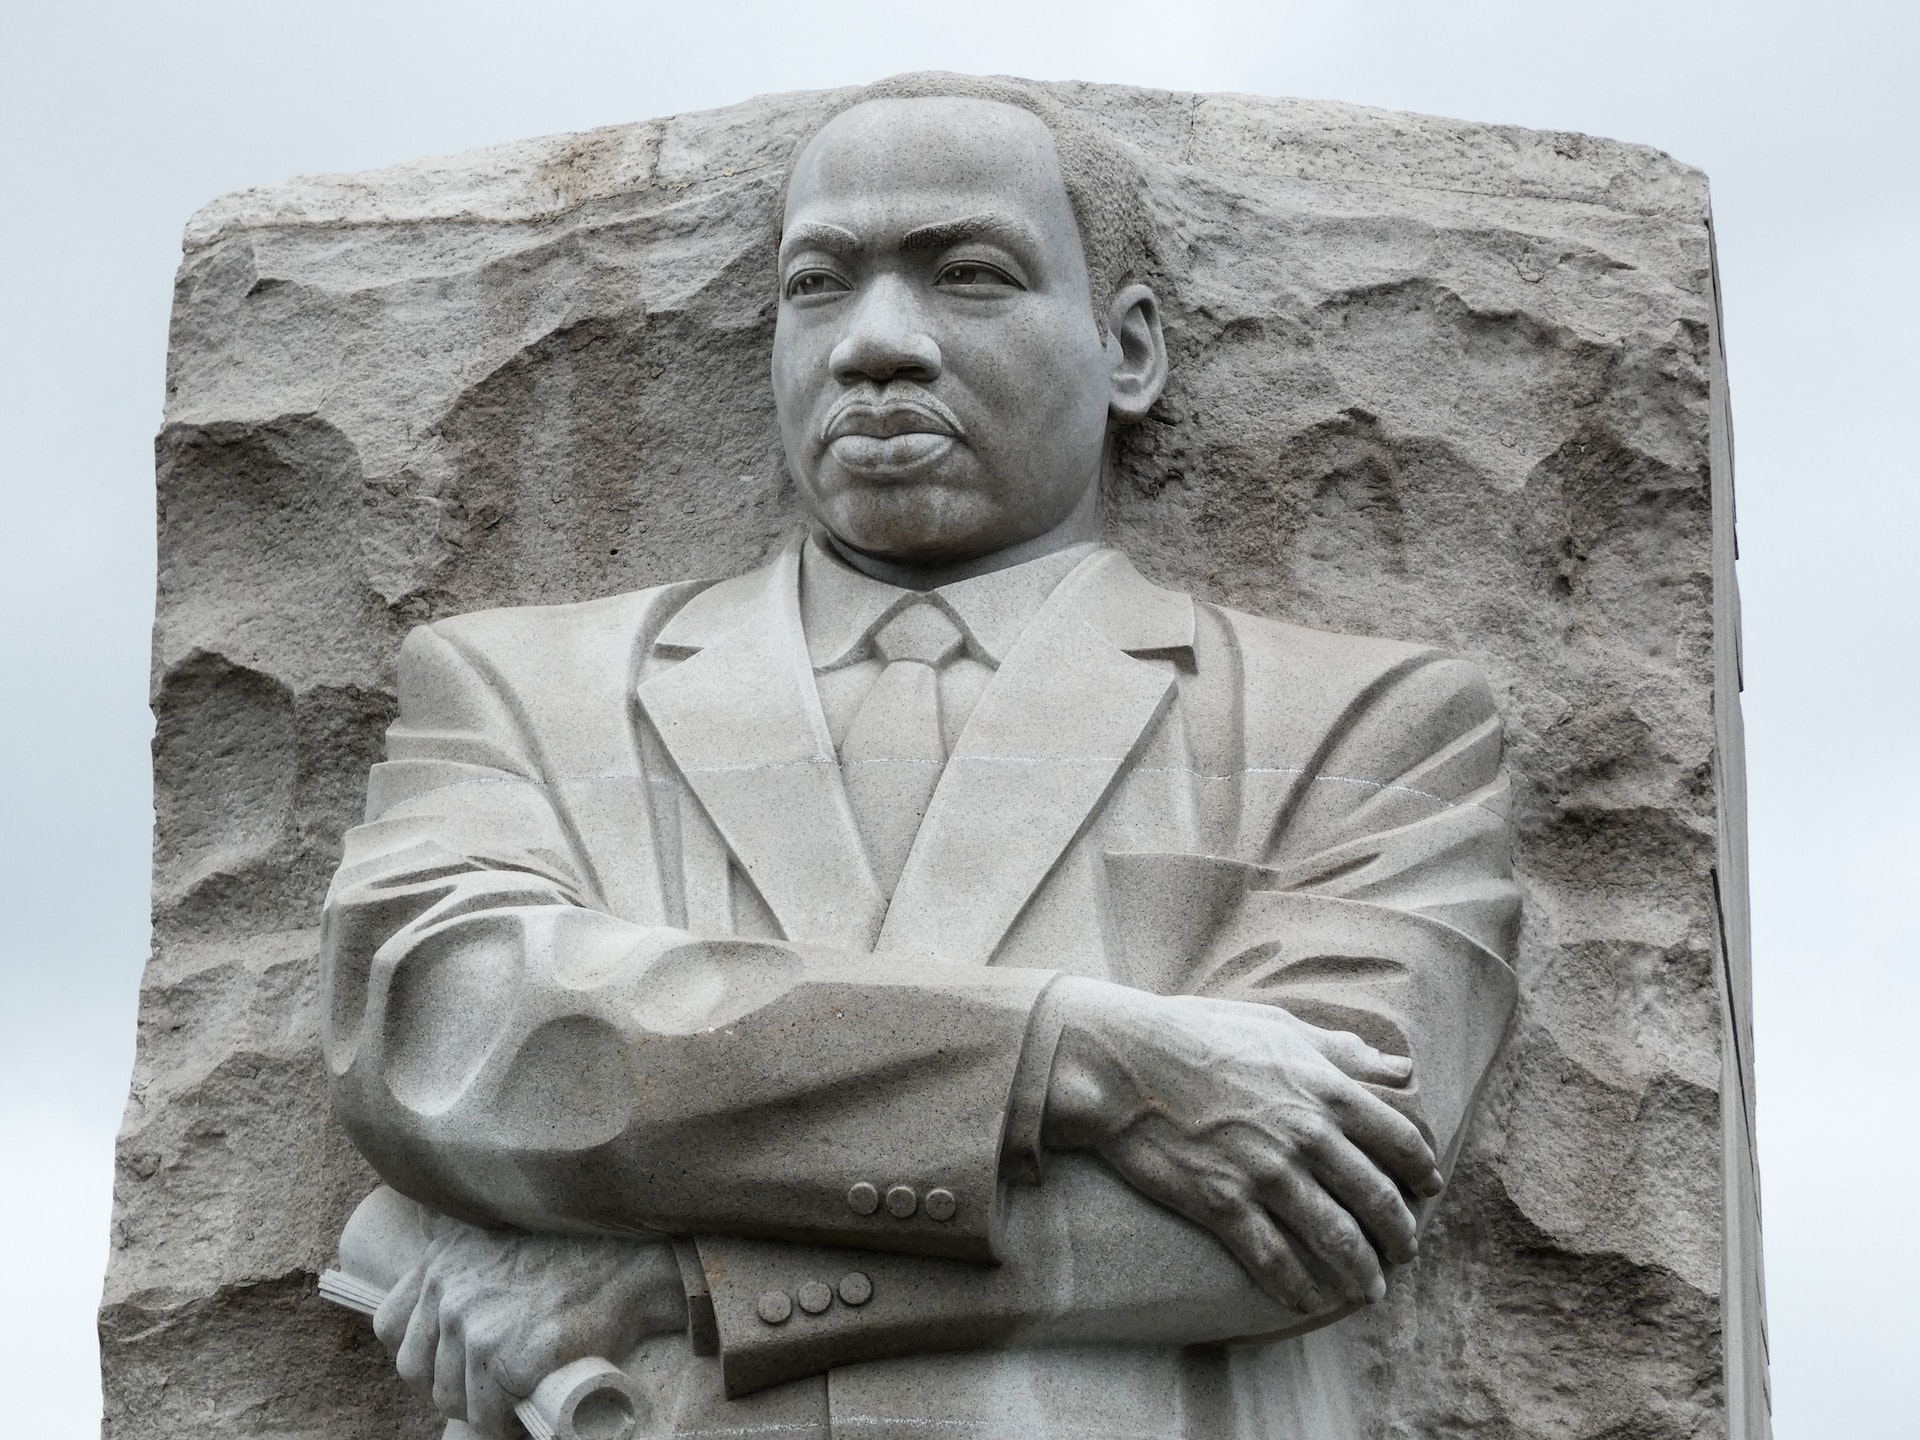 To the Mountaintop with Dr. King